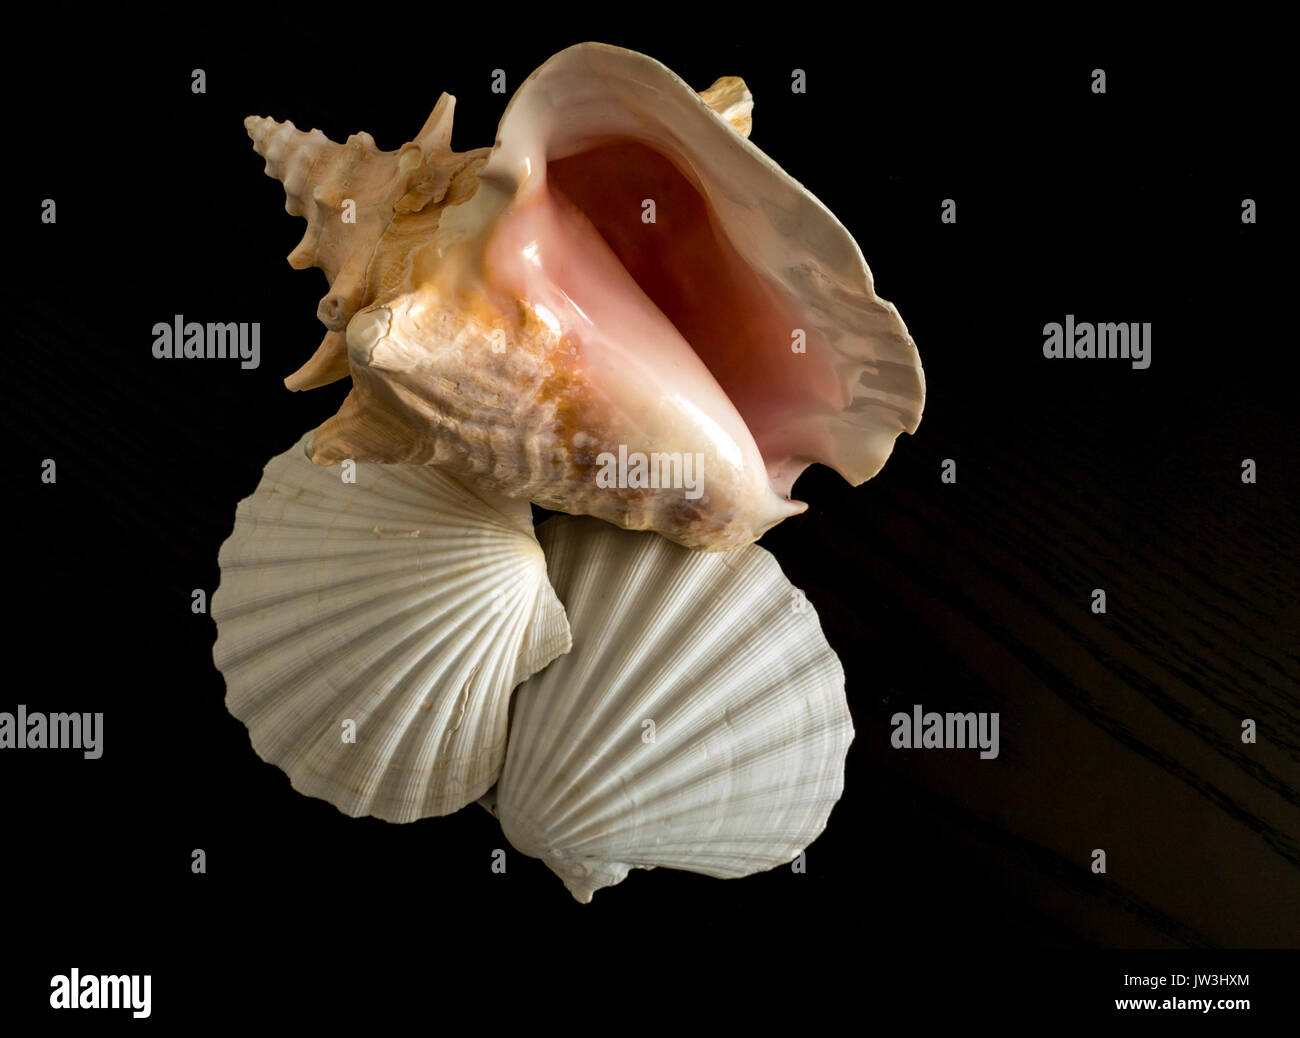 Sea shells including large pink conch and two large white scallop shells on black background Stock Photo